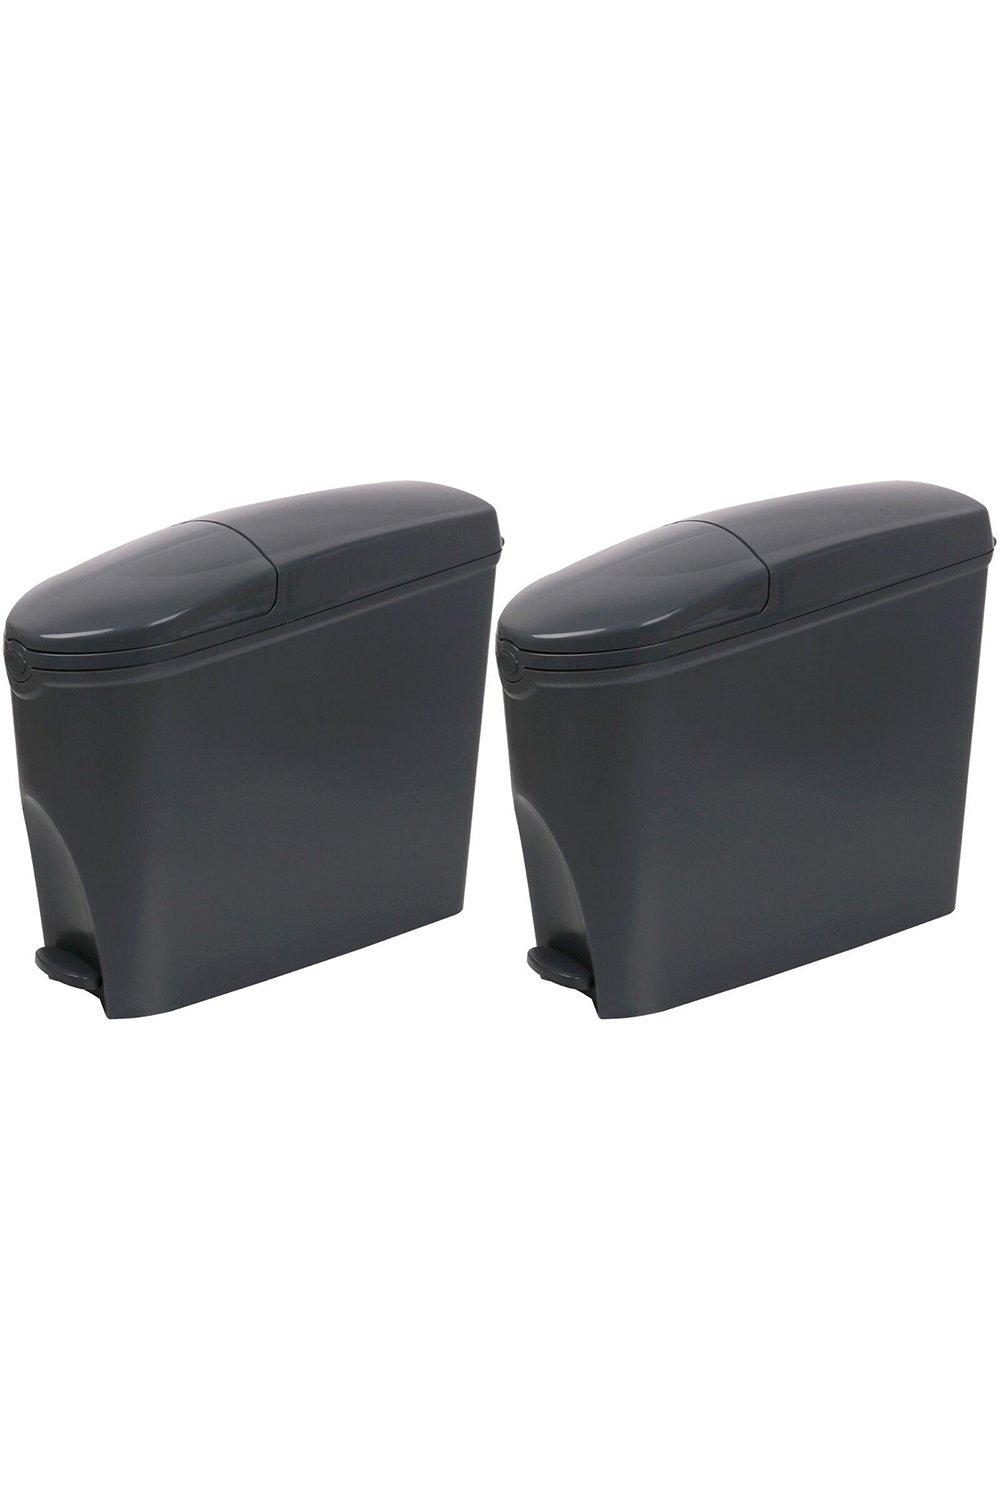 Grey Pedal Operated Toilet Sanitary Bin 2 x 20 Litre Capacity